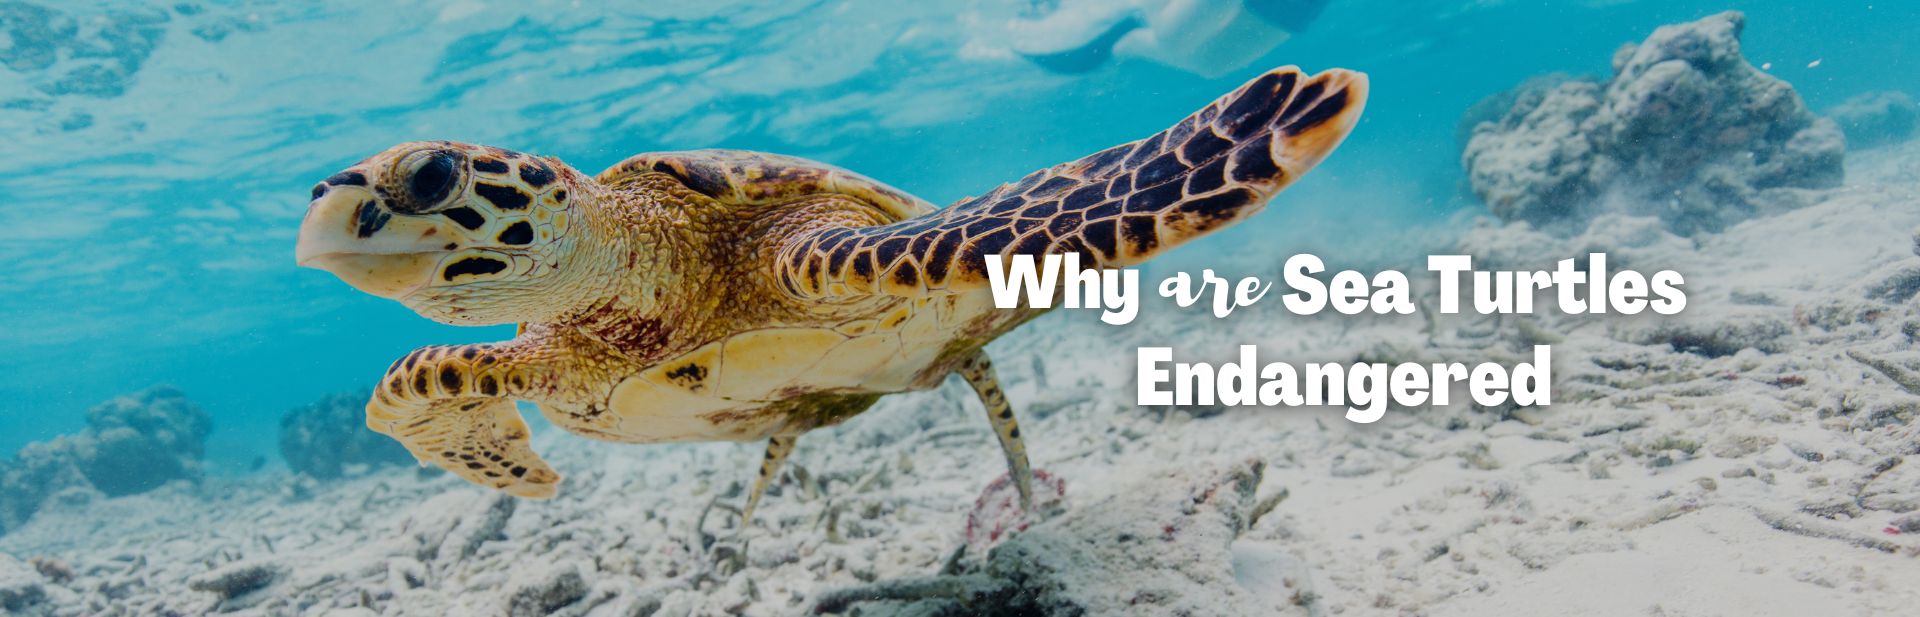 Why Are Sea Turtles Endangered? Face-to-Face with the Biggest Threats